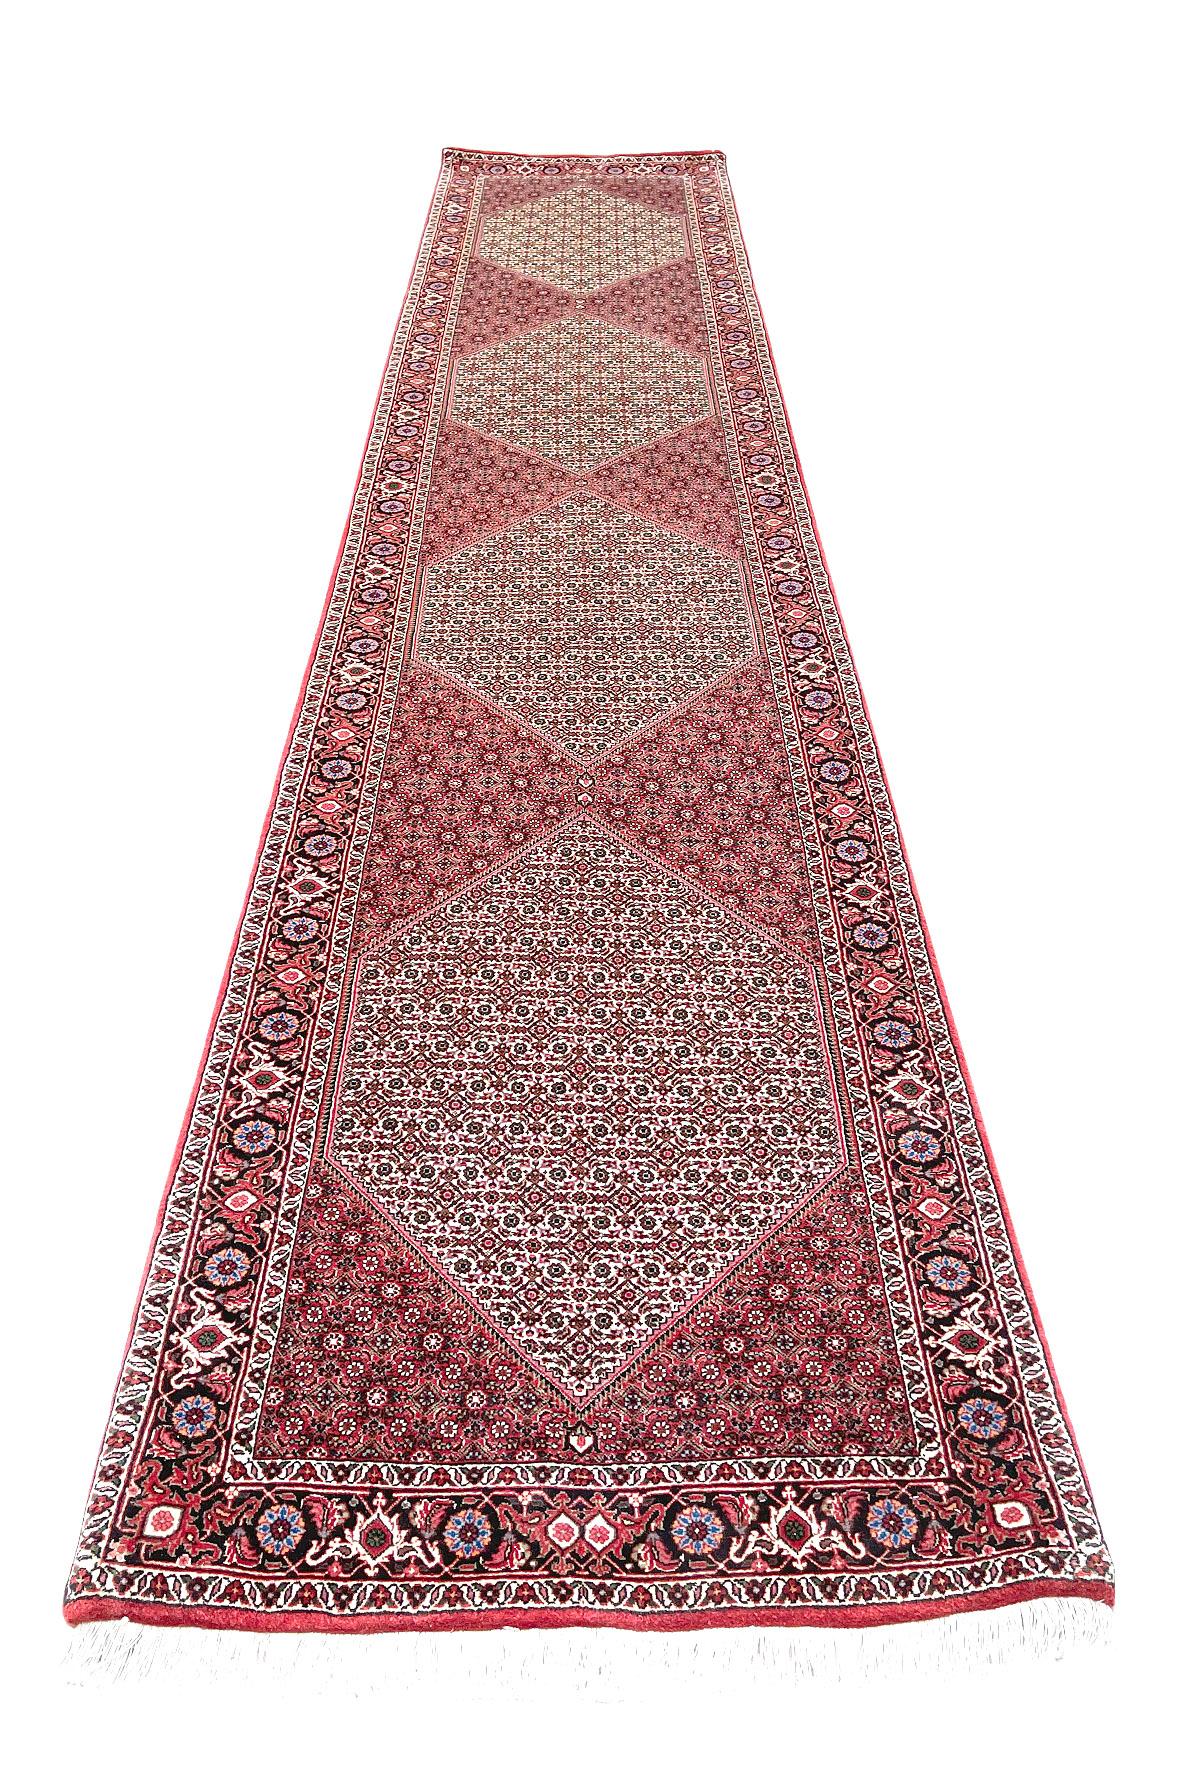 This Authentic beautiful Bijar runner has wool pile and cotton foundation. It is made using high-quality wool, and the knots are beaten down using a heavy metal comb to give a tight, dirt-resistant pile. This stunning Persian Bijar (Tukan) rug is